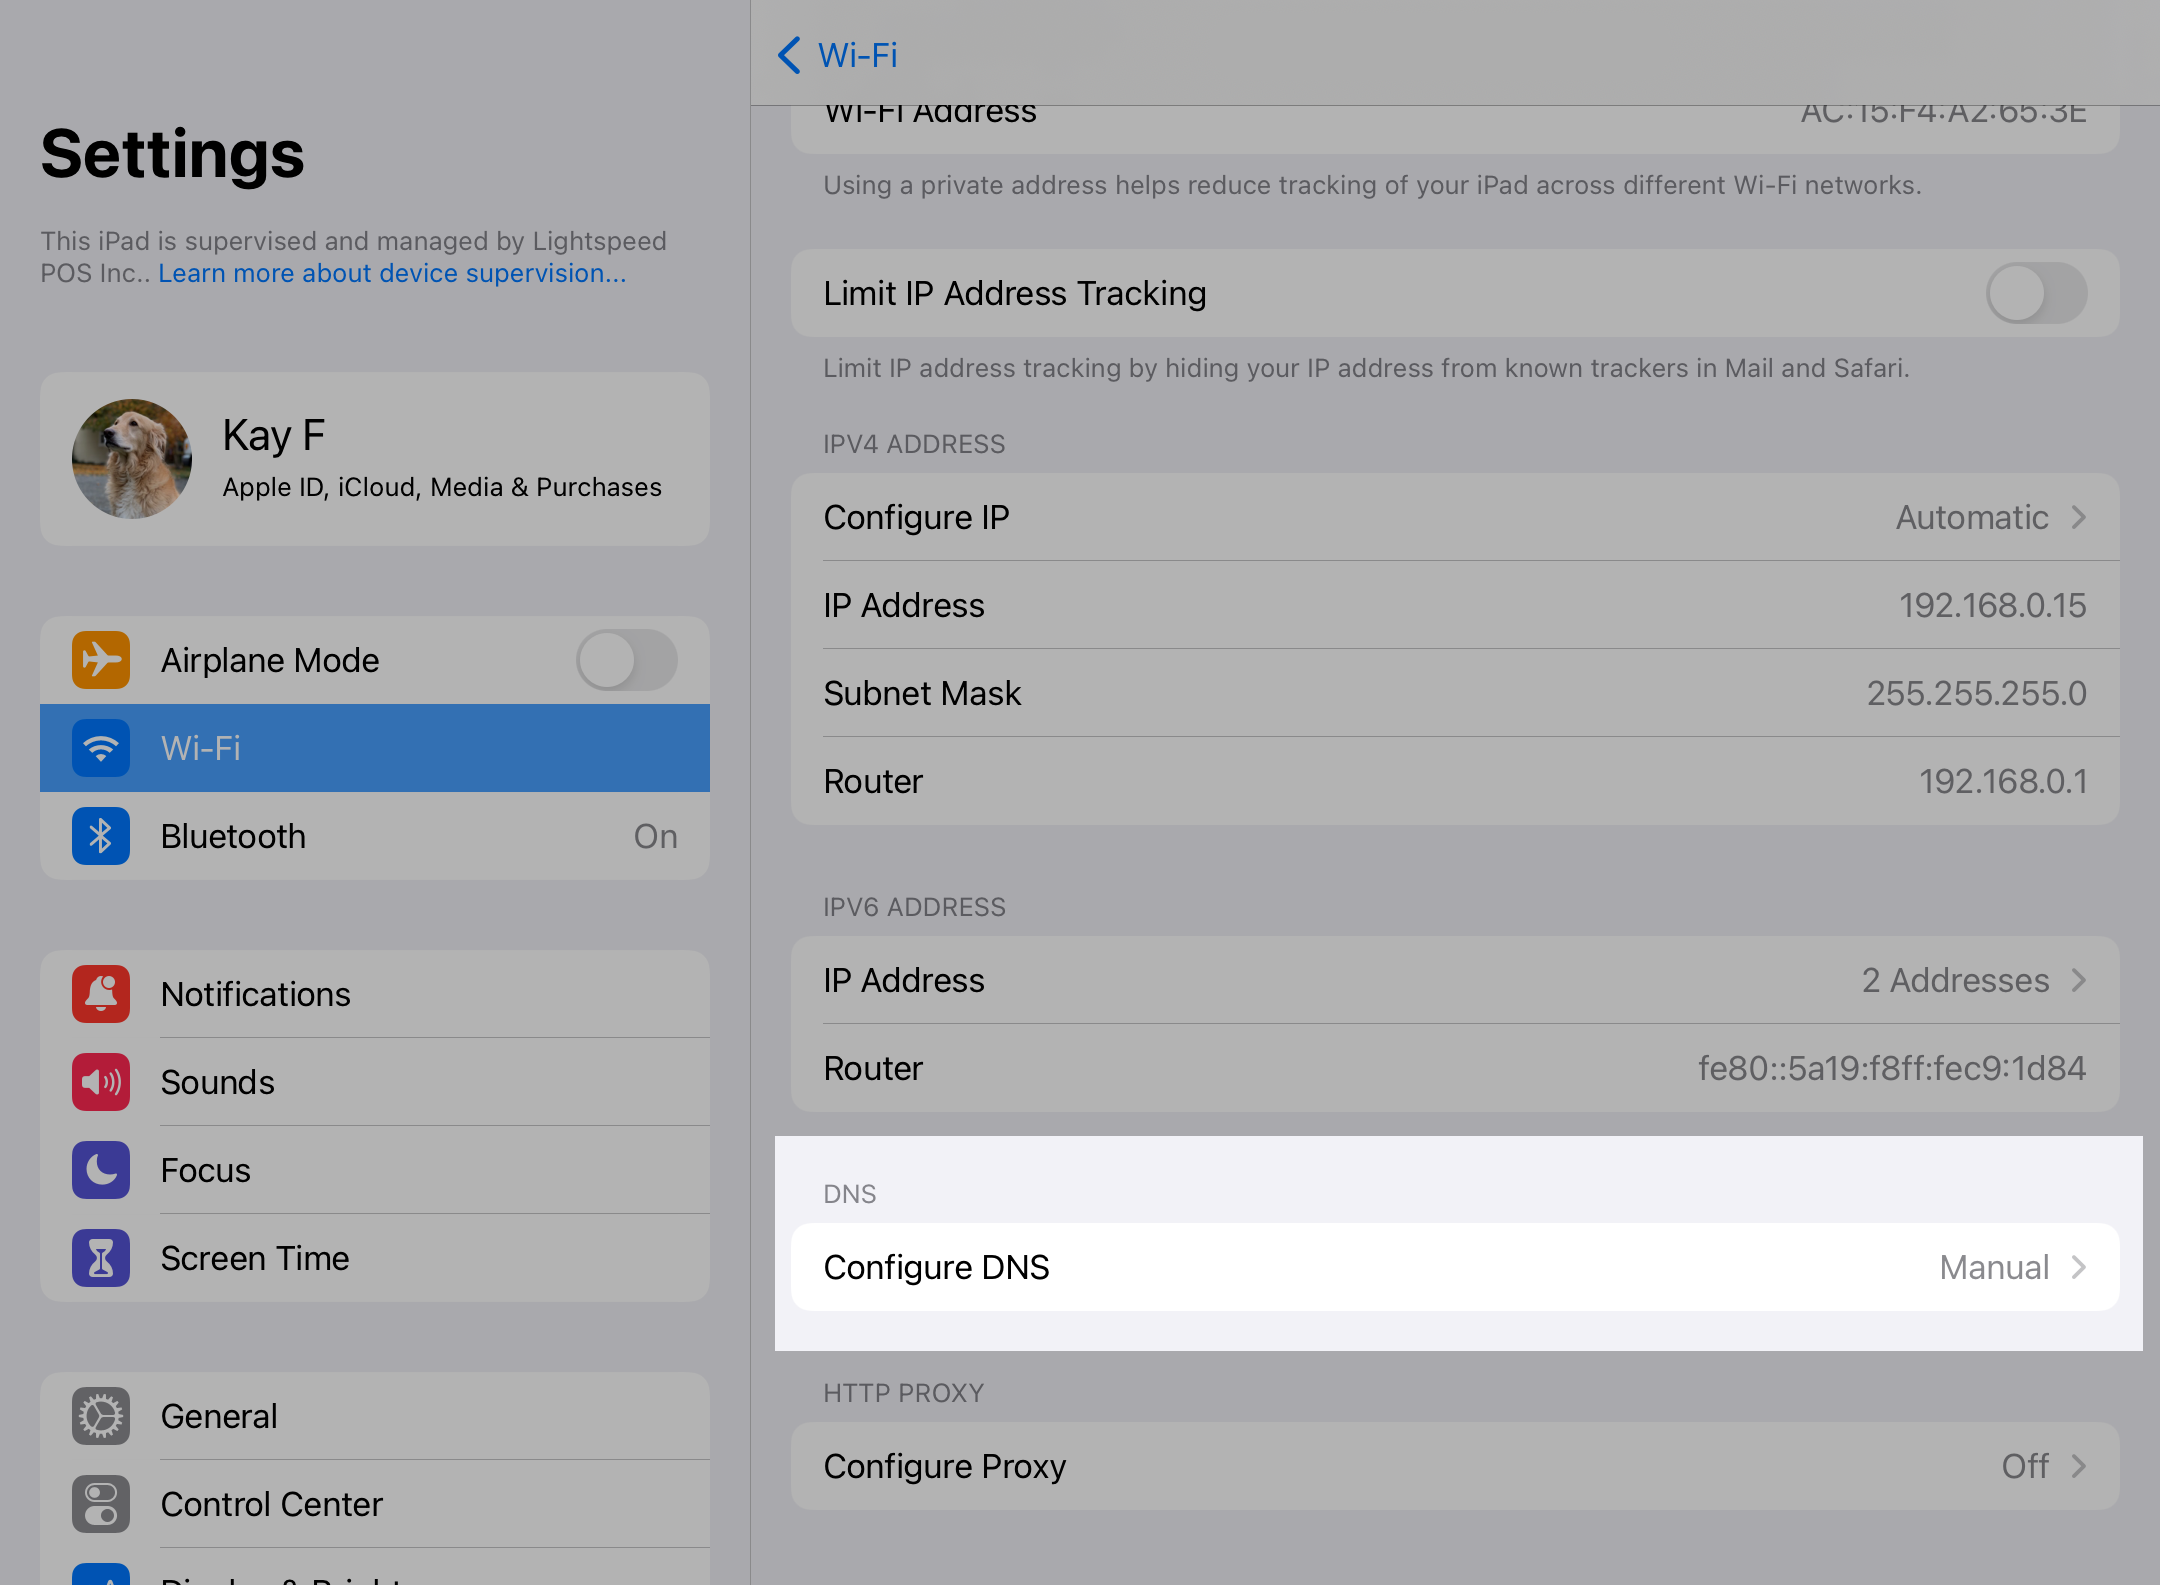 Image shows the Wi-Fi Settings page on iPad. Configure DNS has been highlighted.